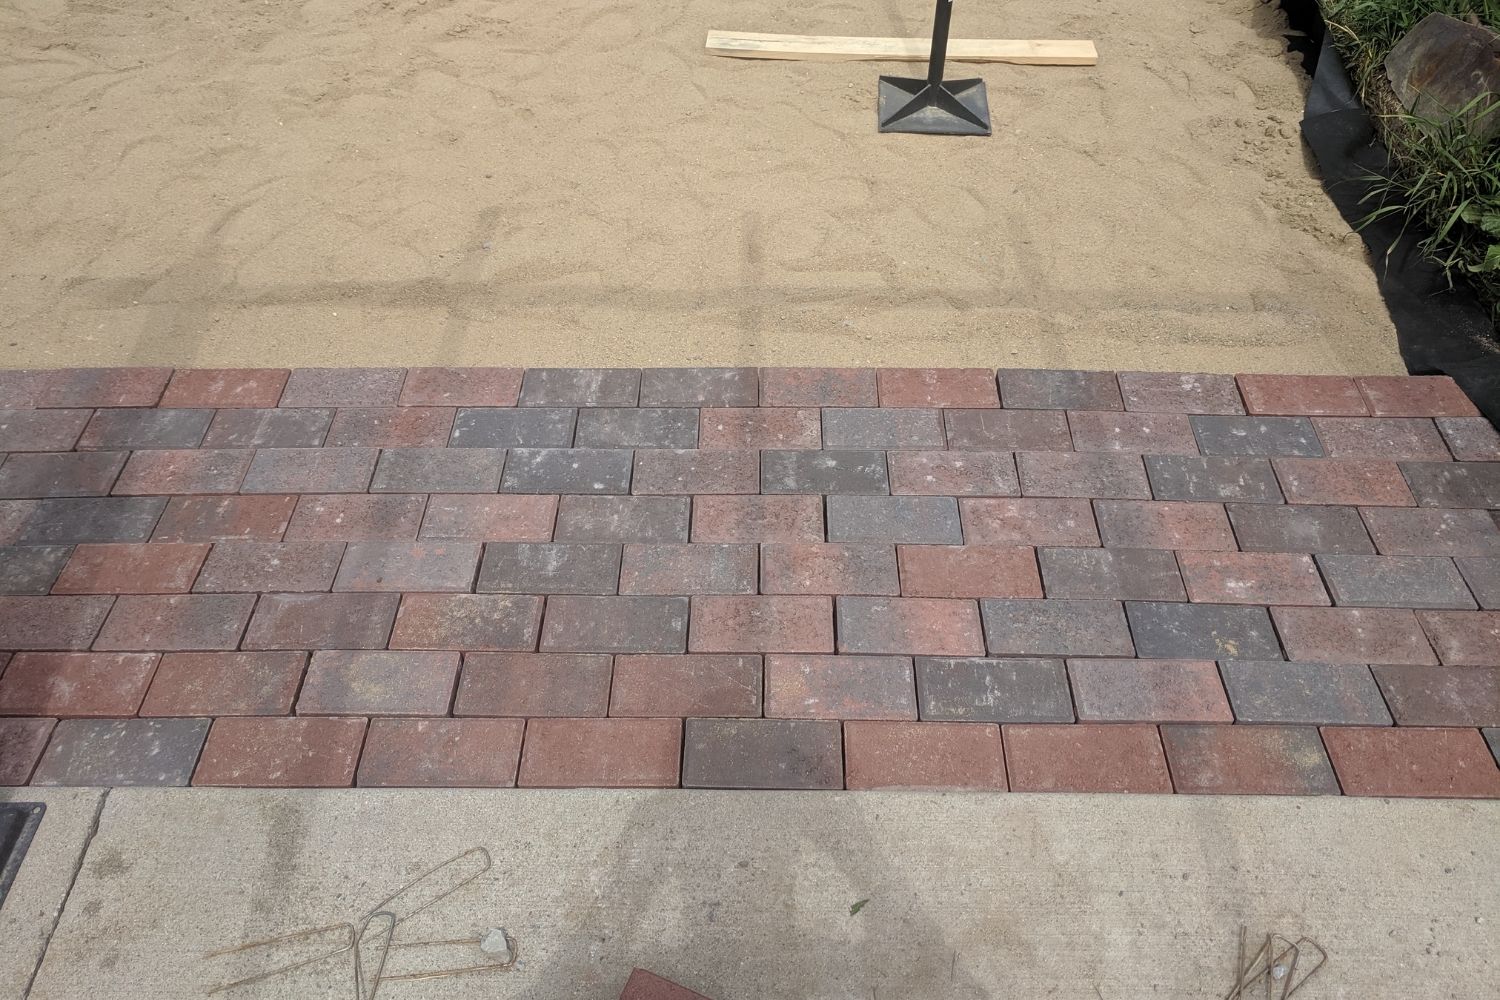 Is laying a brick patio hard to do?